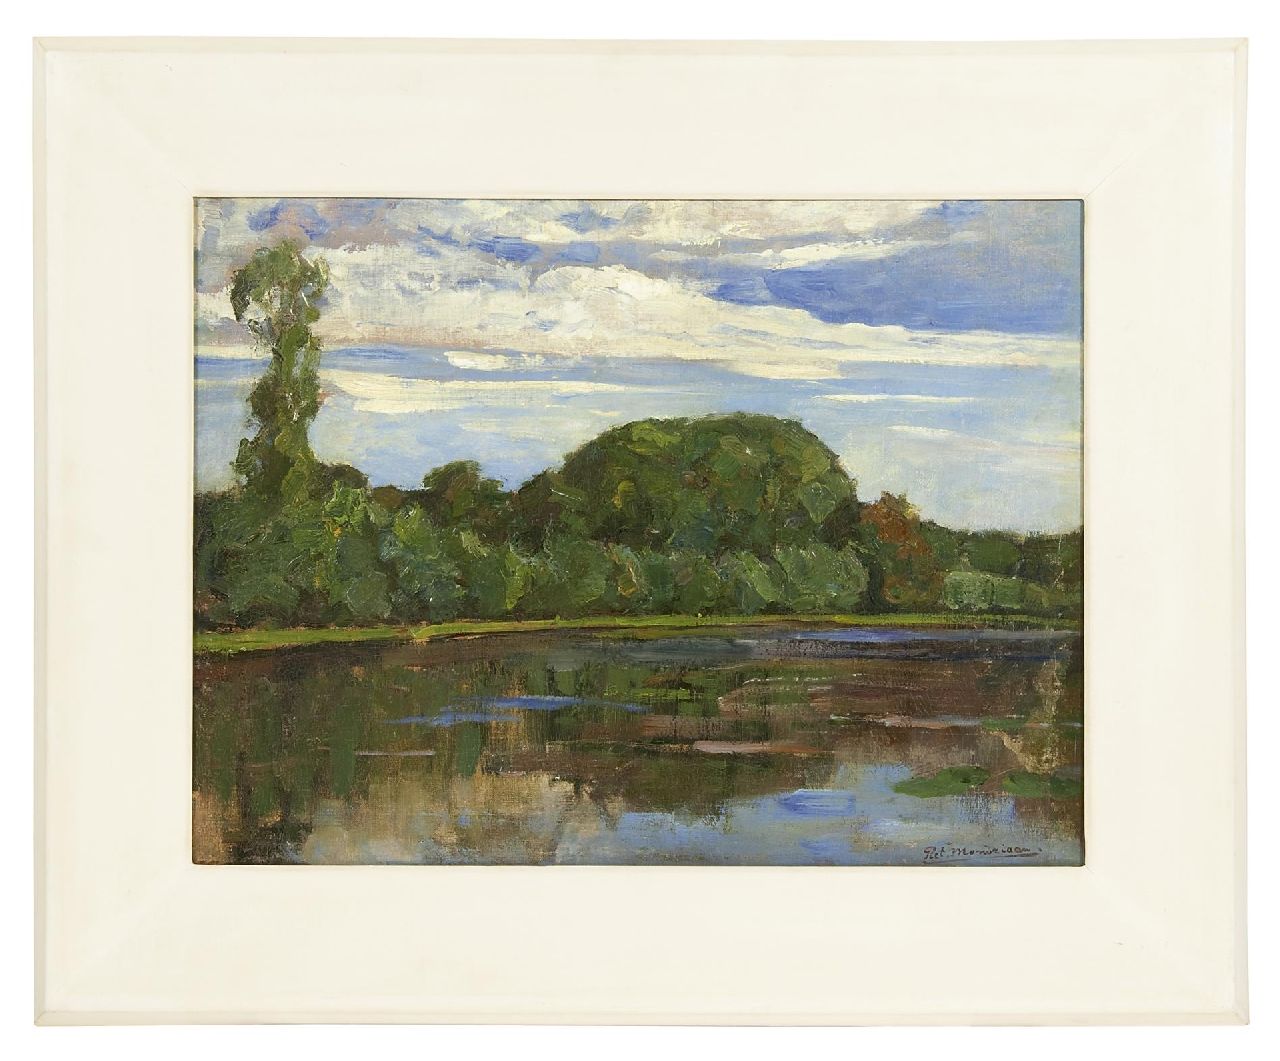 Mondriaan P.C.  | Pieter Cornelis 'Piet' Mondriaan | Paintings offered for sale | Geinrust farm with Isolated Tree at left isolated tree with 'isolated tree', oil on canvas 47.7 x 63.8 cm, signed l.r. and painted ca. 1905-1906